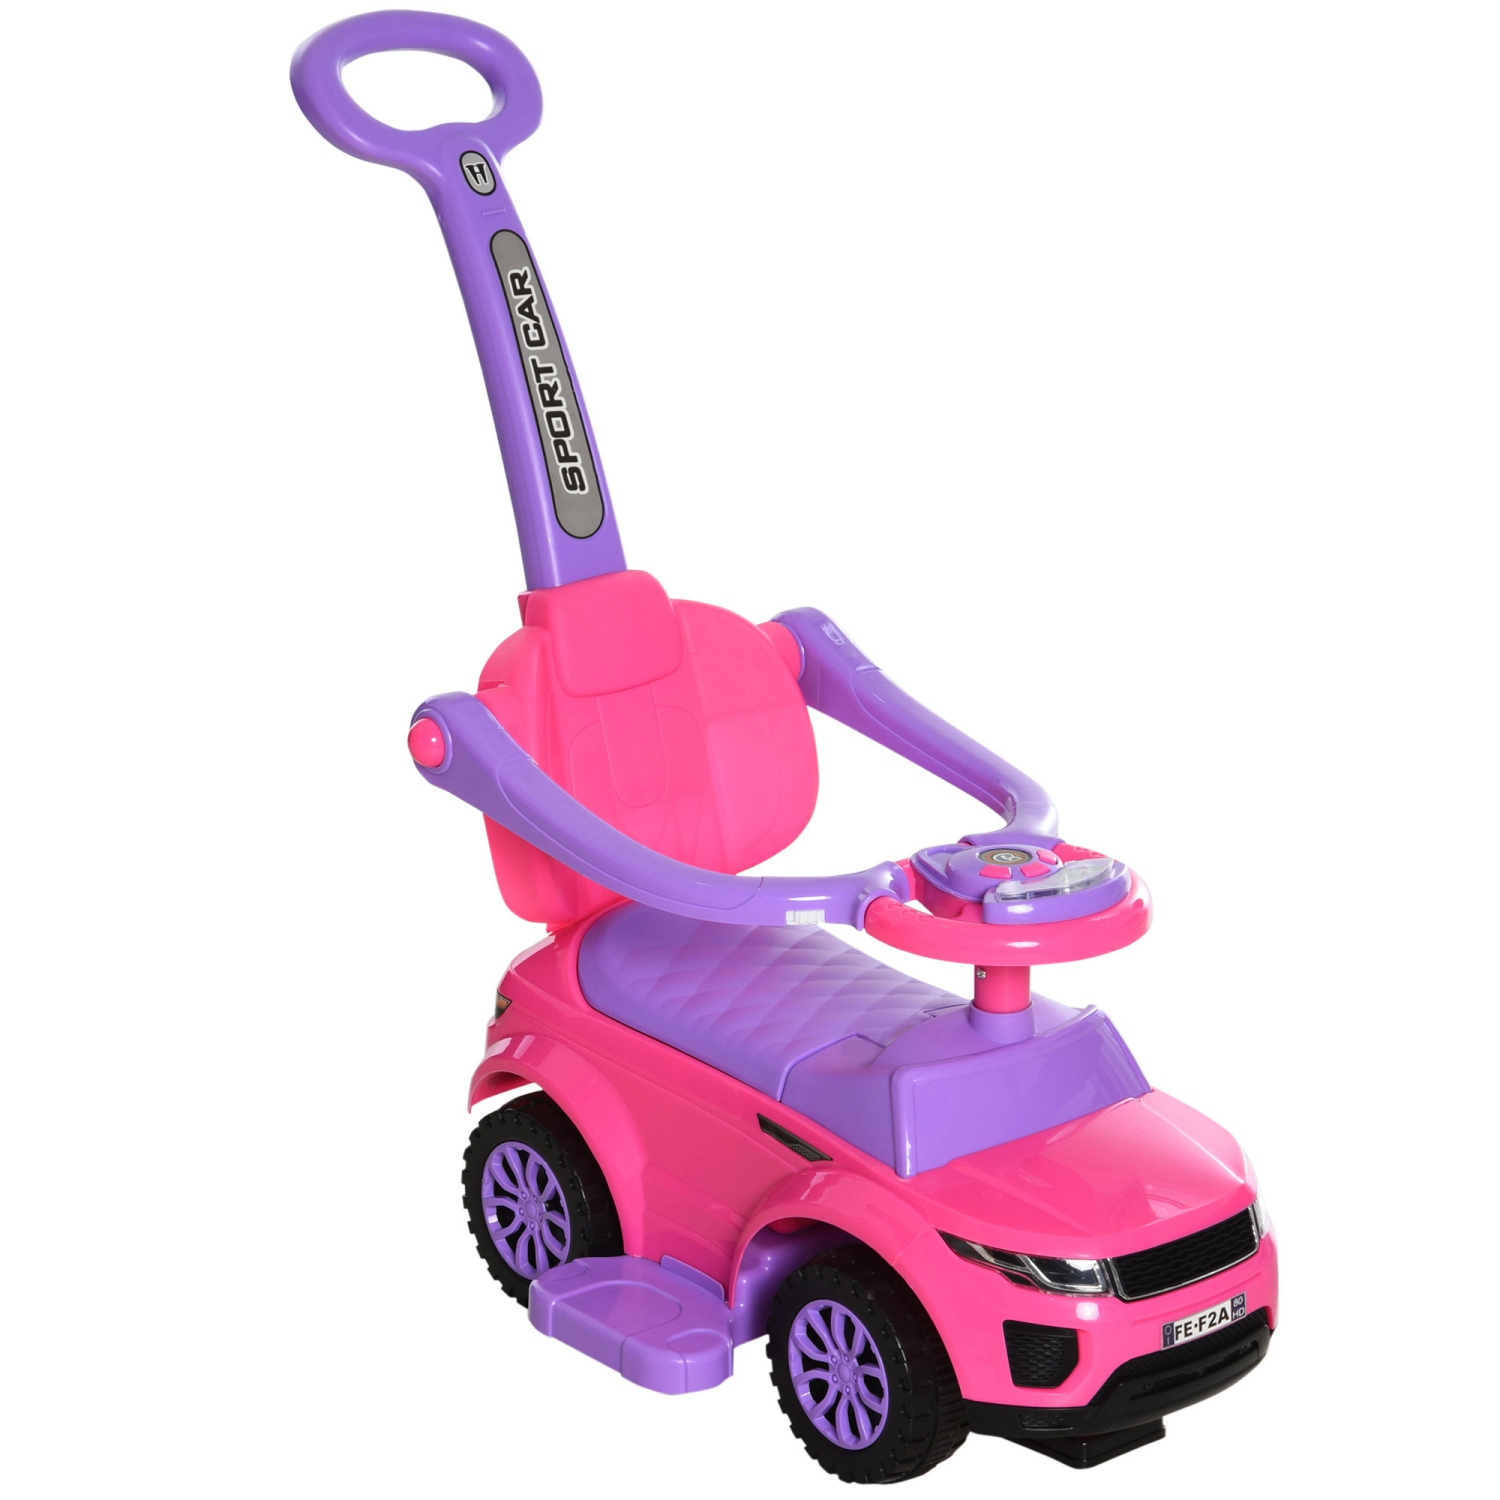 Aosom 2 In 1 Kid Ride on Push Car Stroller Sliding Ride on Car with Horn Music Light Function Secure Bar Ride on Toy for Boy Girl Toddlers 1-3 Years Old Pink